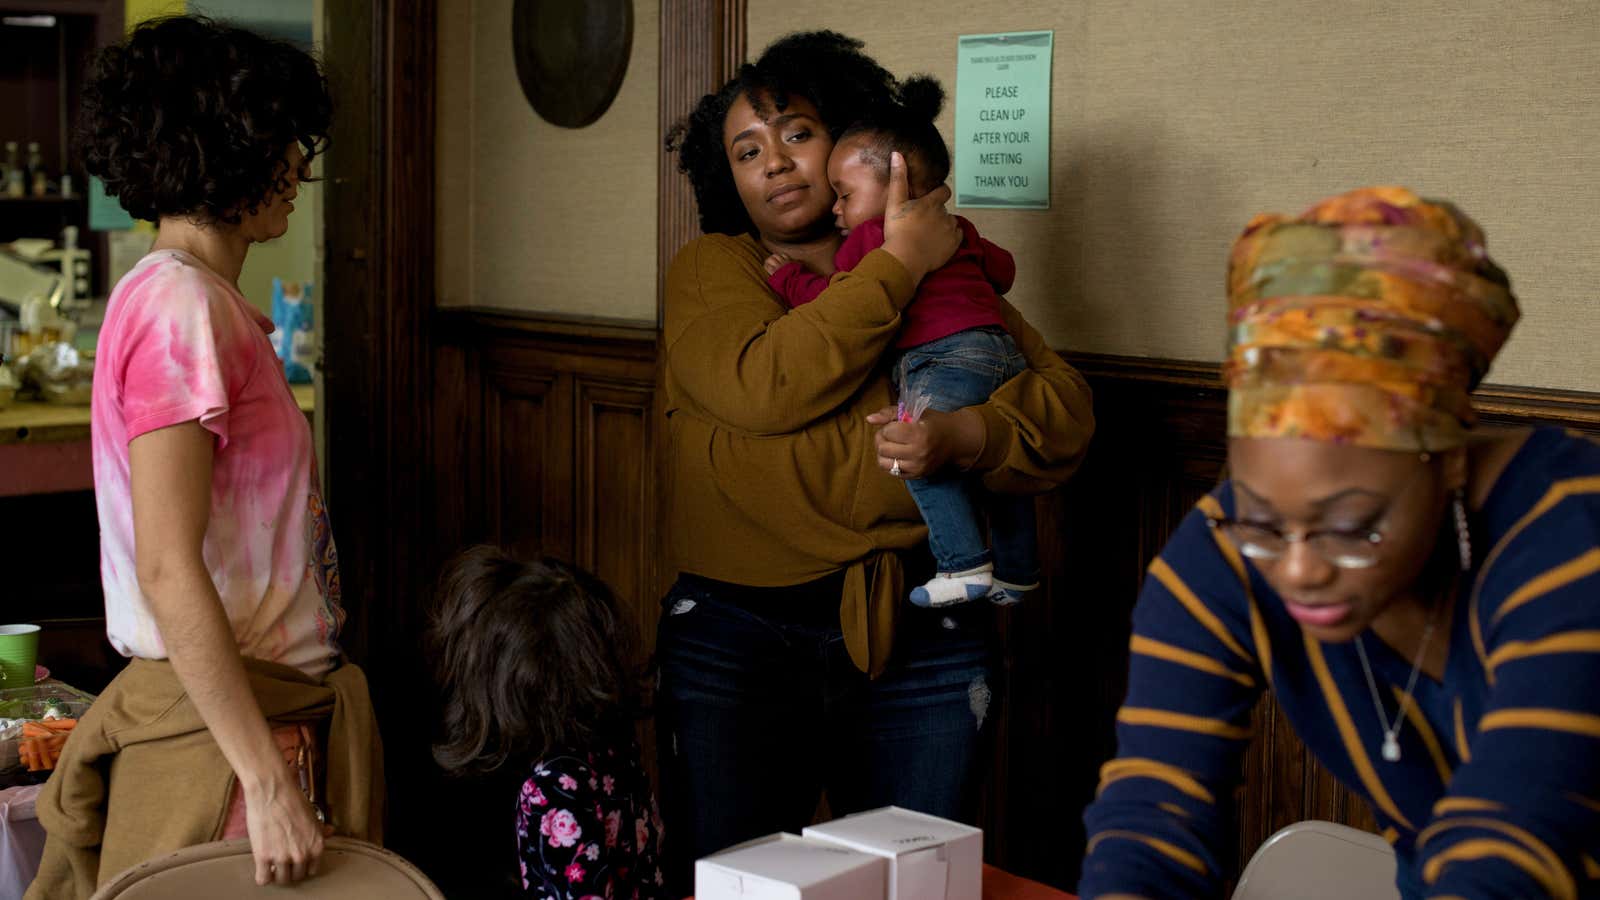 Siwatu-Salama Ra gave birth to her son Zakai, now 10 months old, while incarcerated in the Michigan prison system in 2018.